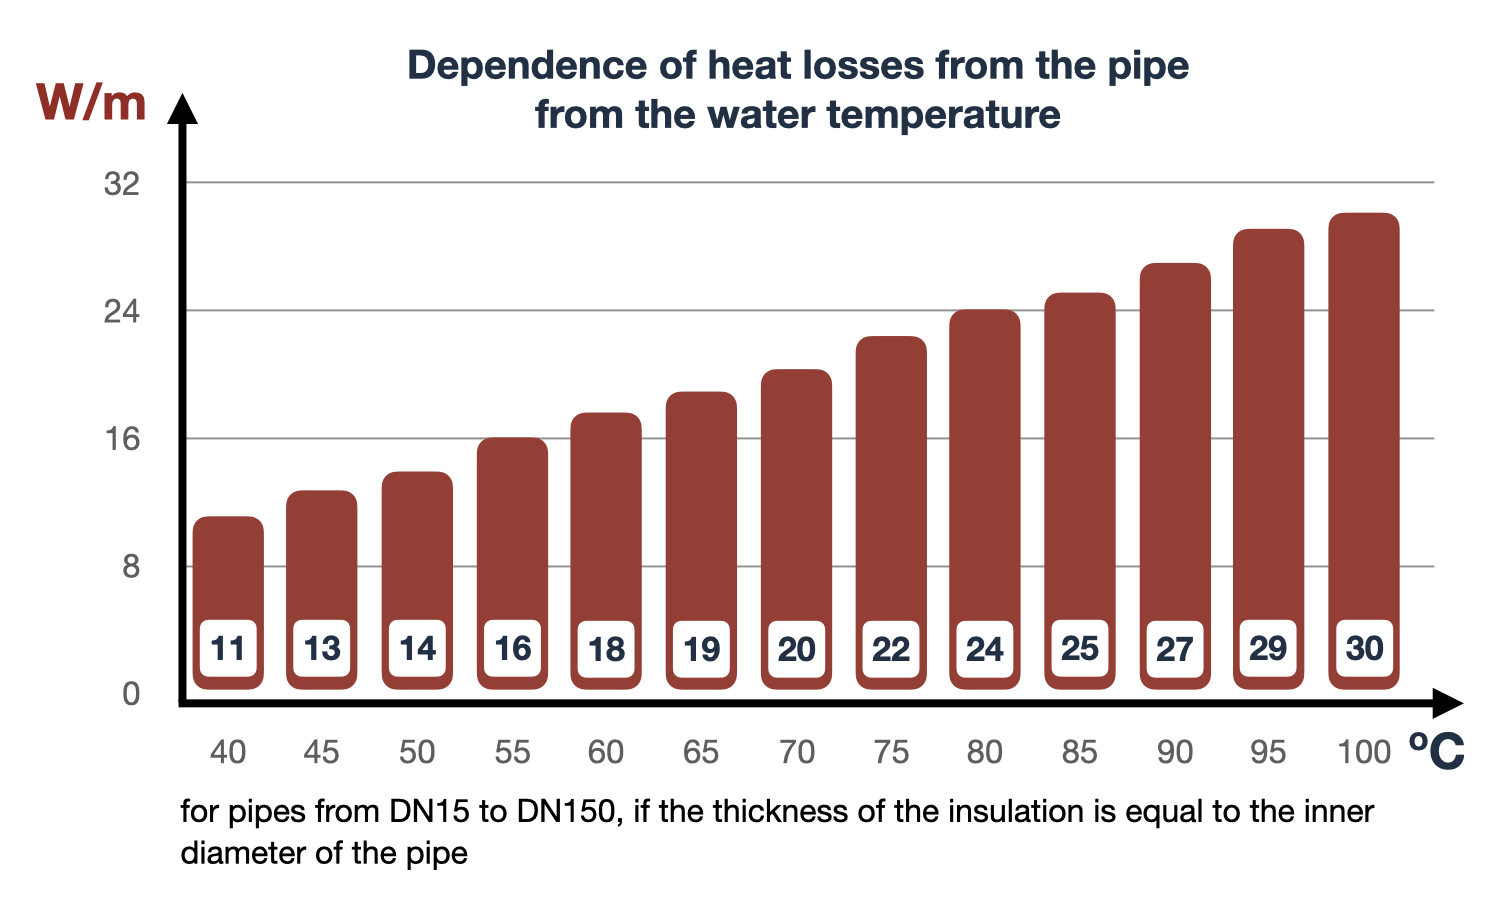 Dependence of heat losses from the pipe from the water temperature